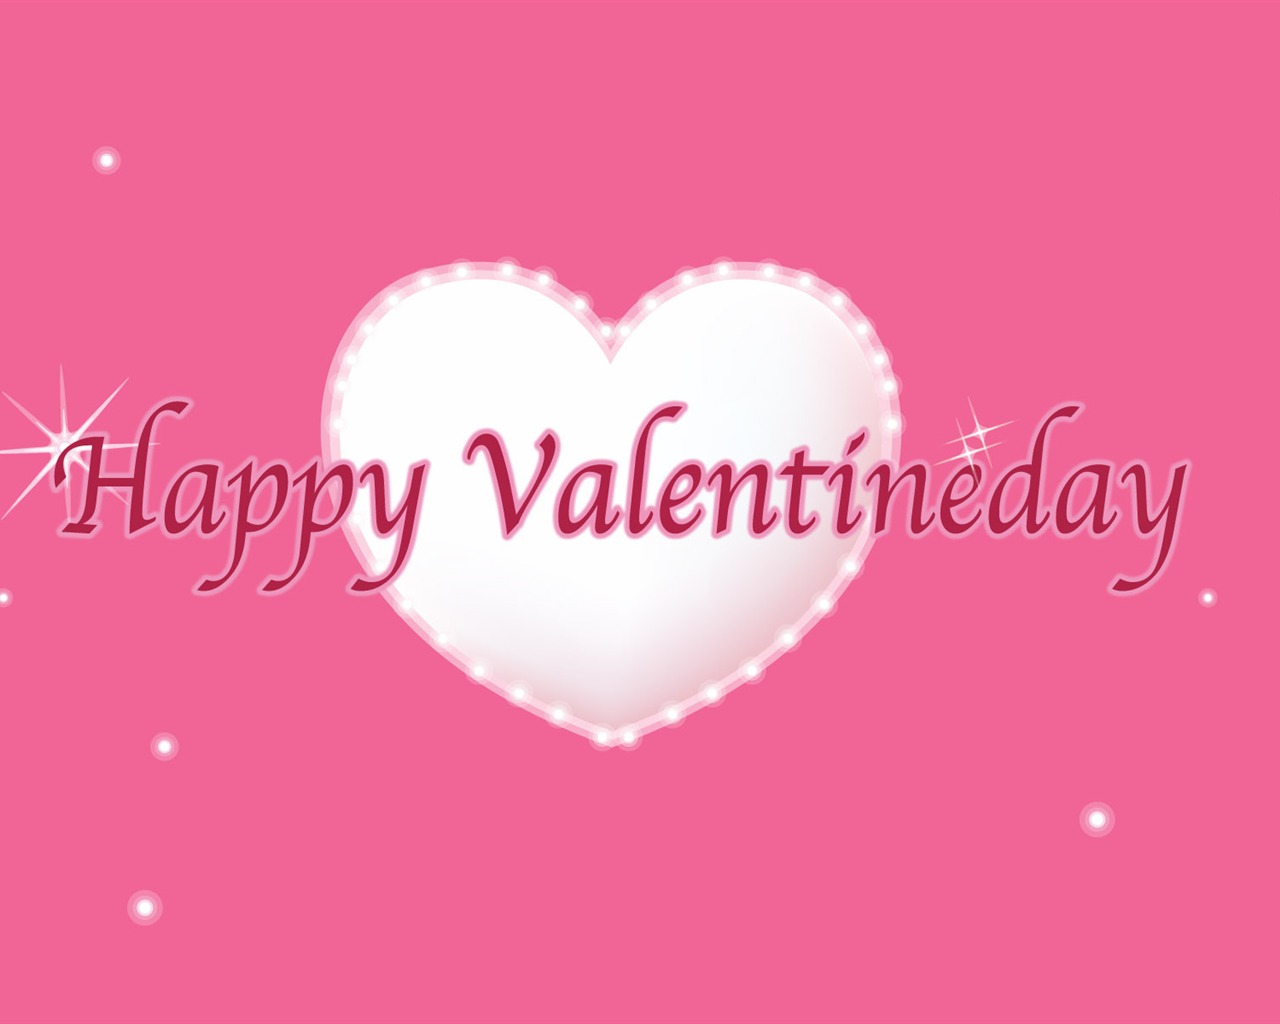 Valentine's Day Love Theme Wallpapers (3) #9 - 1280x1024